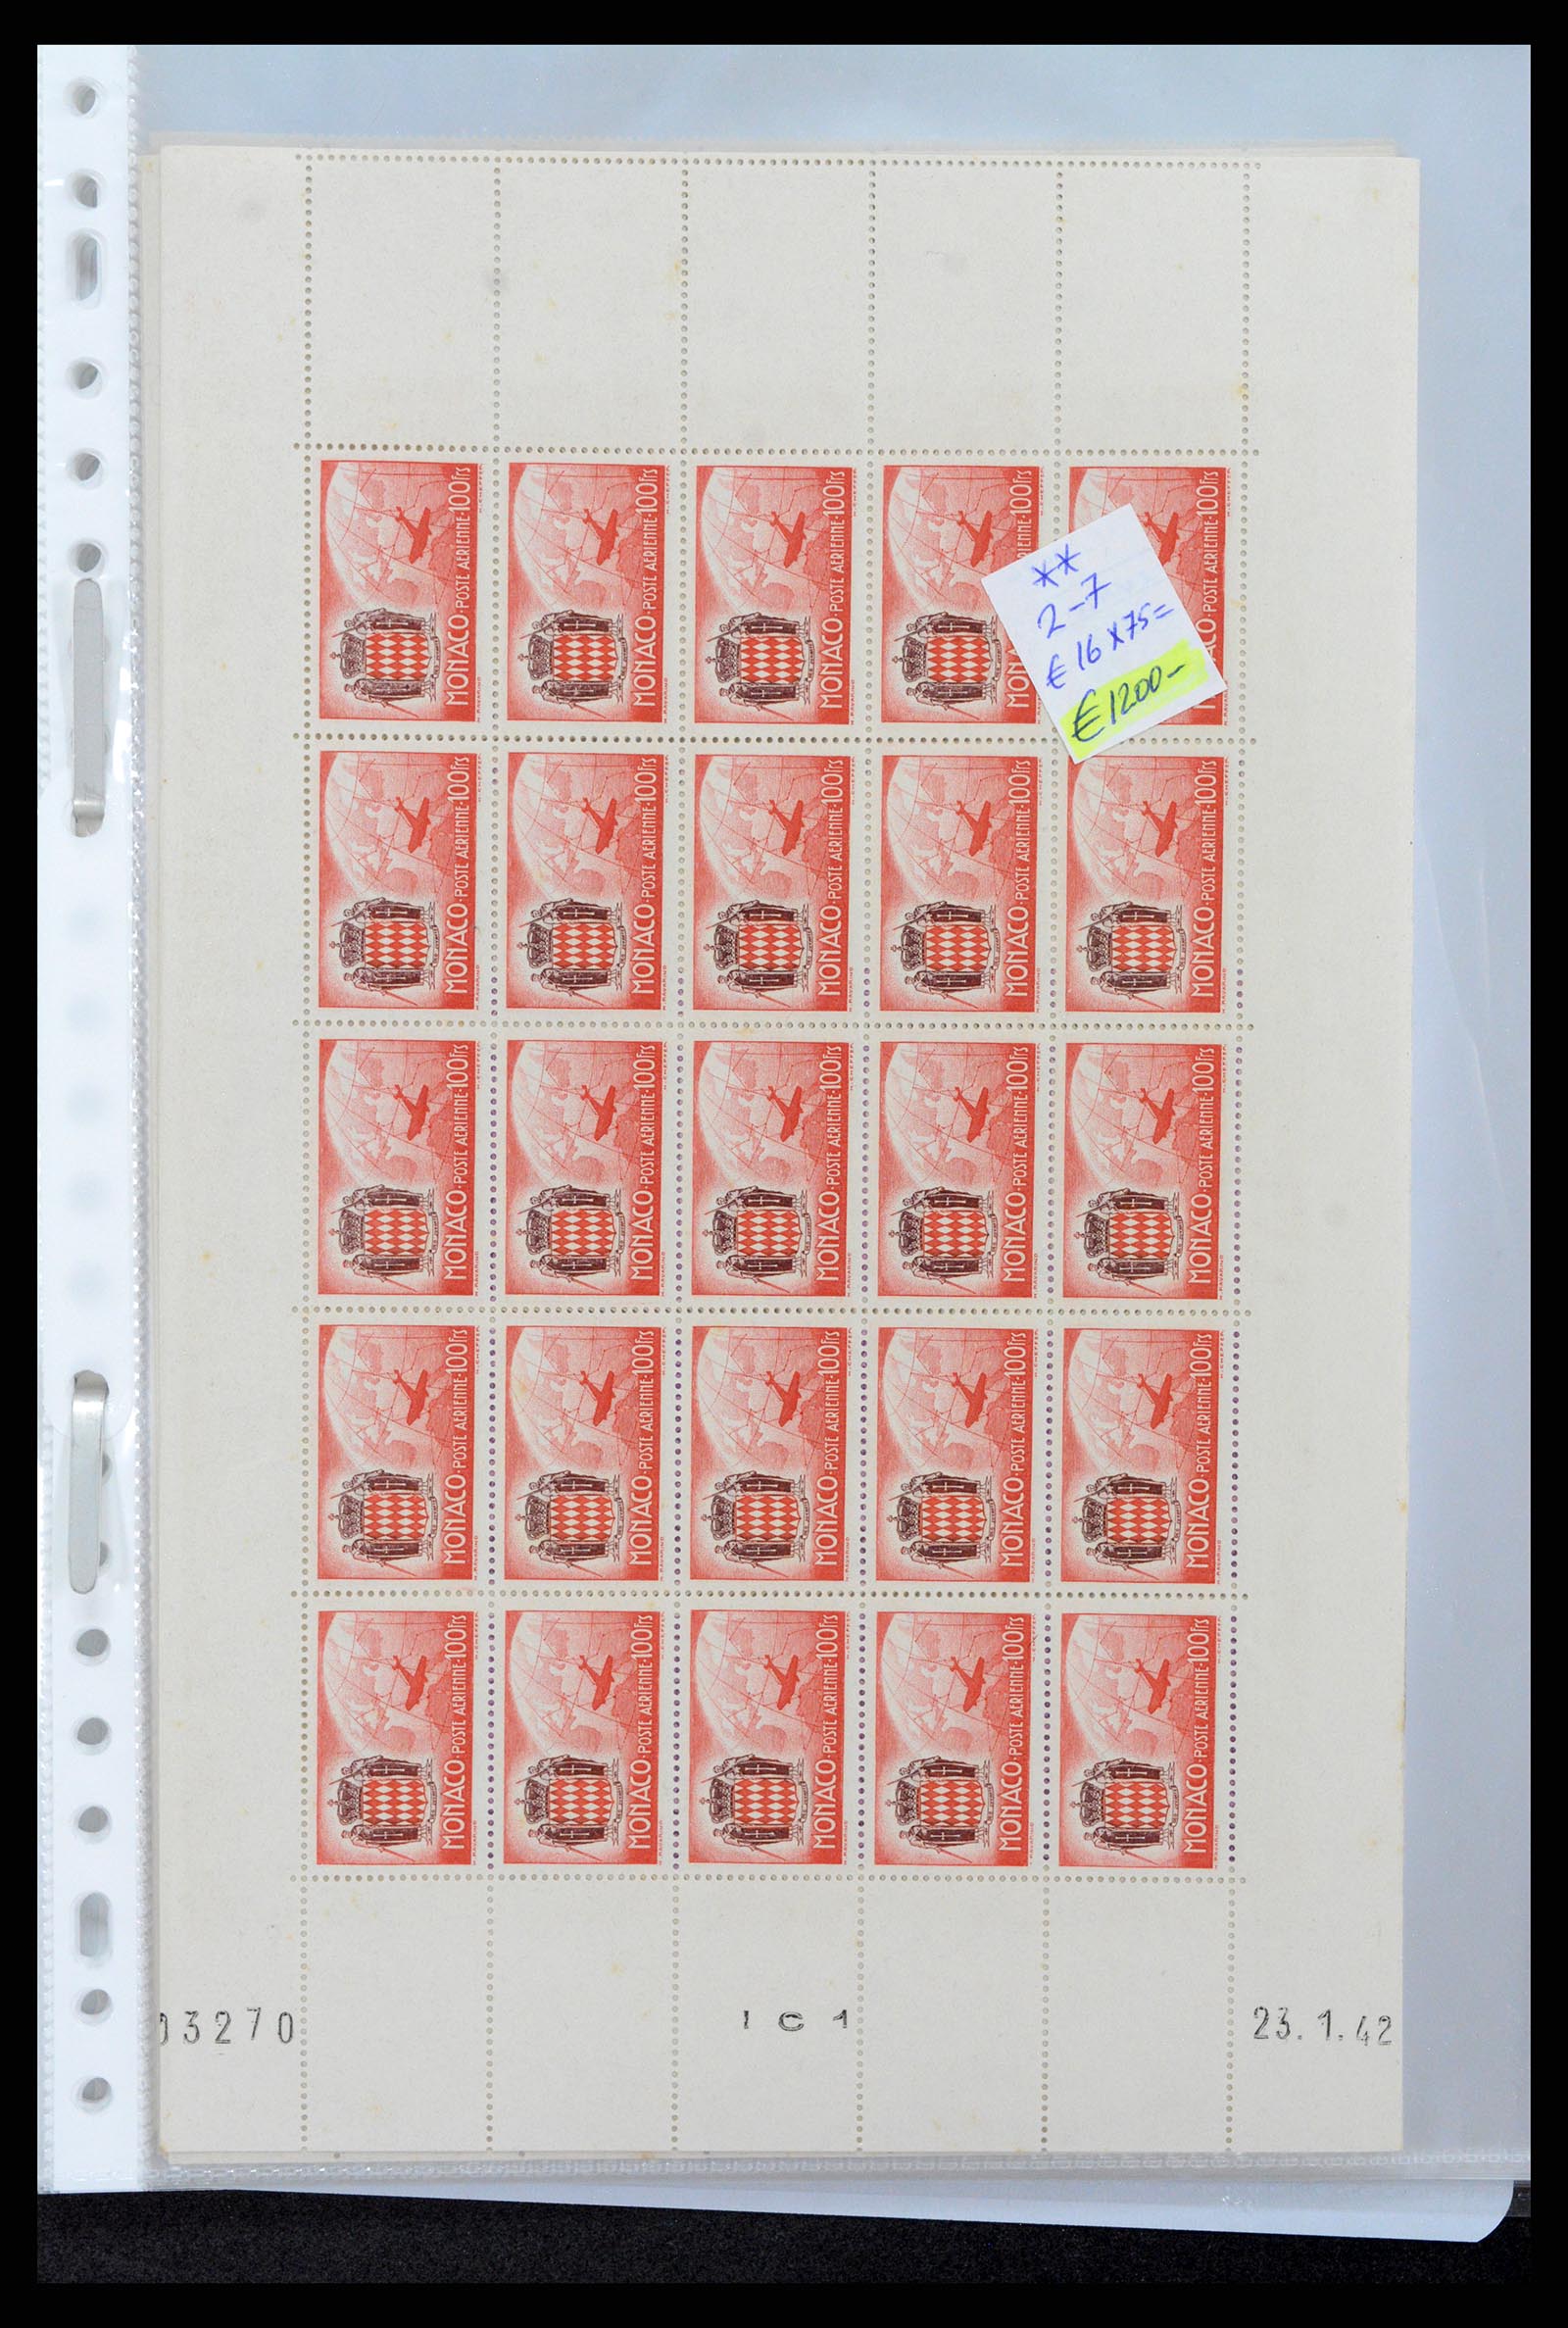 37984 044 - Stamp collection 37984 Monaco better issues 1942-1982.